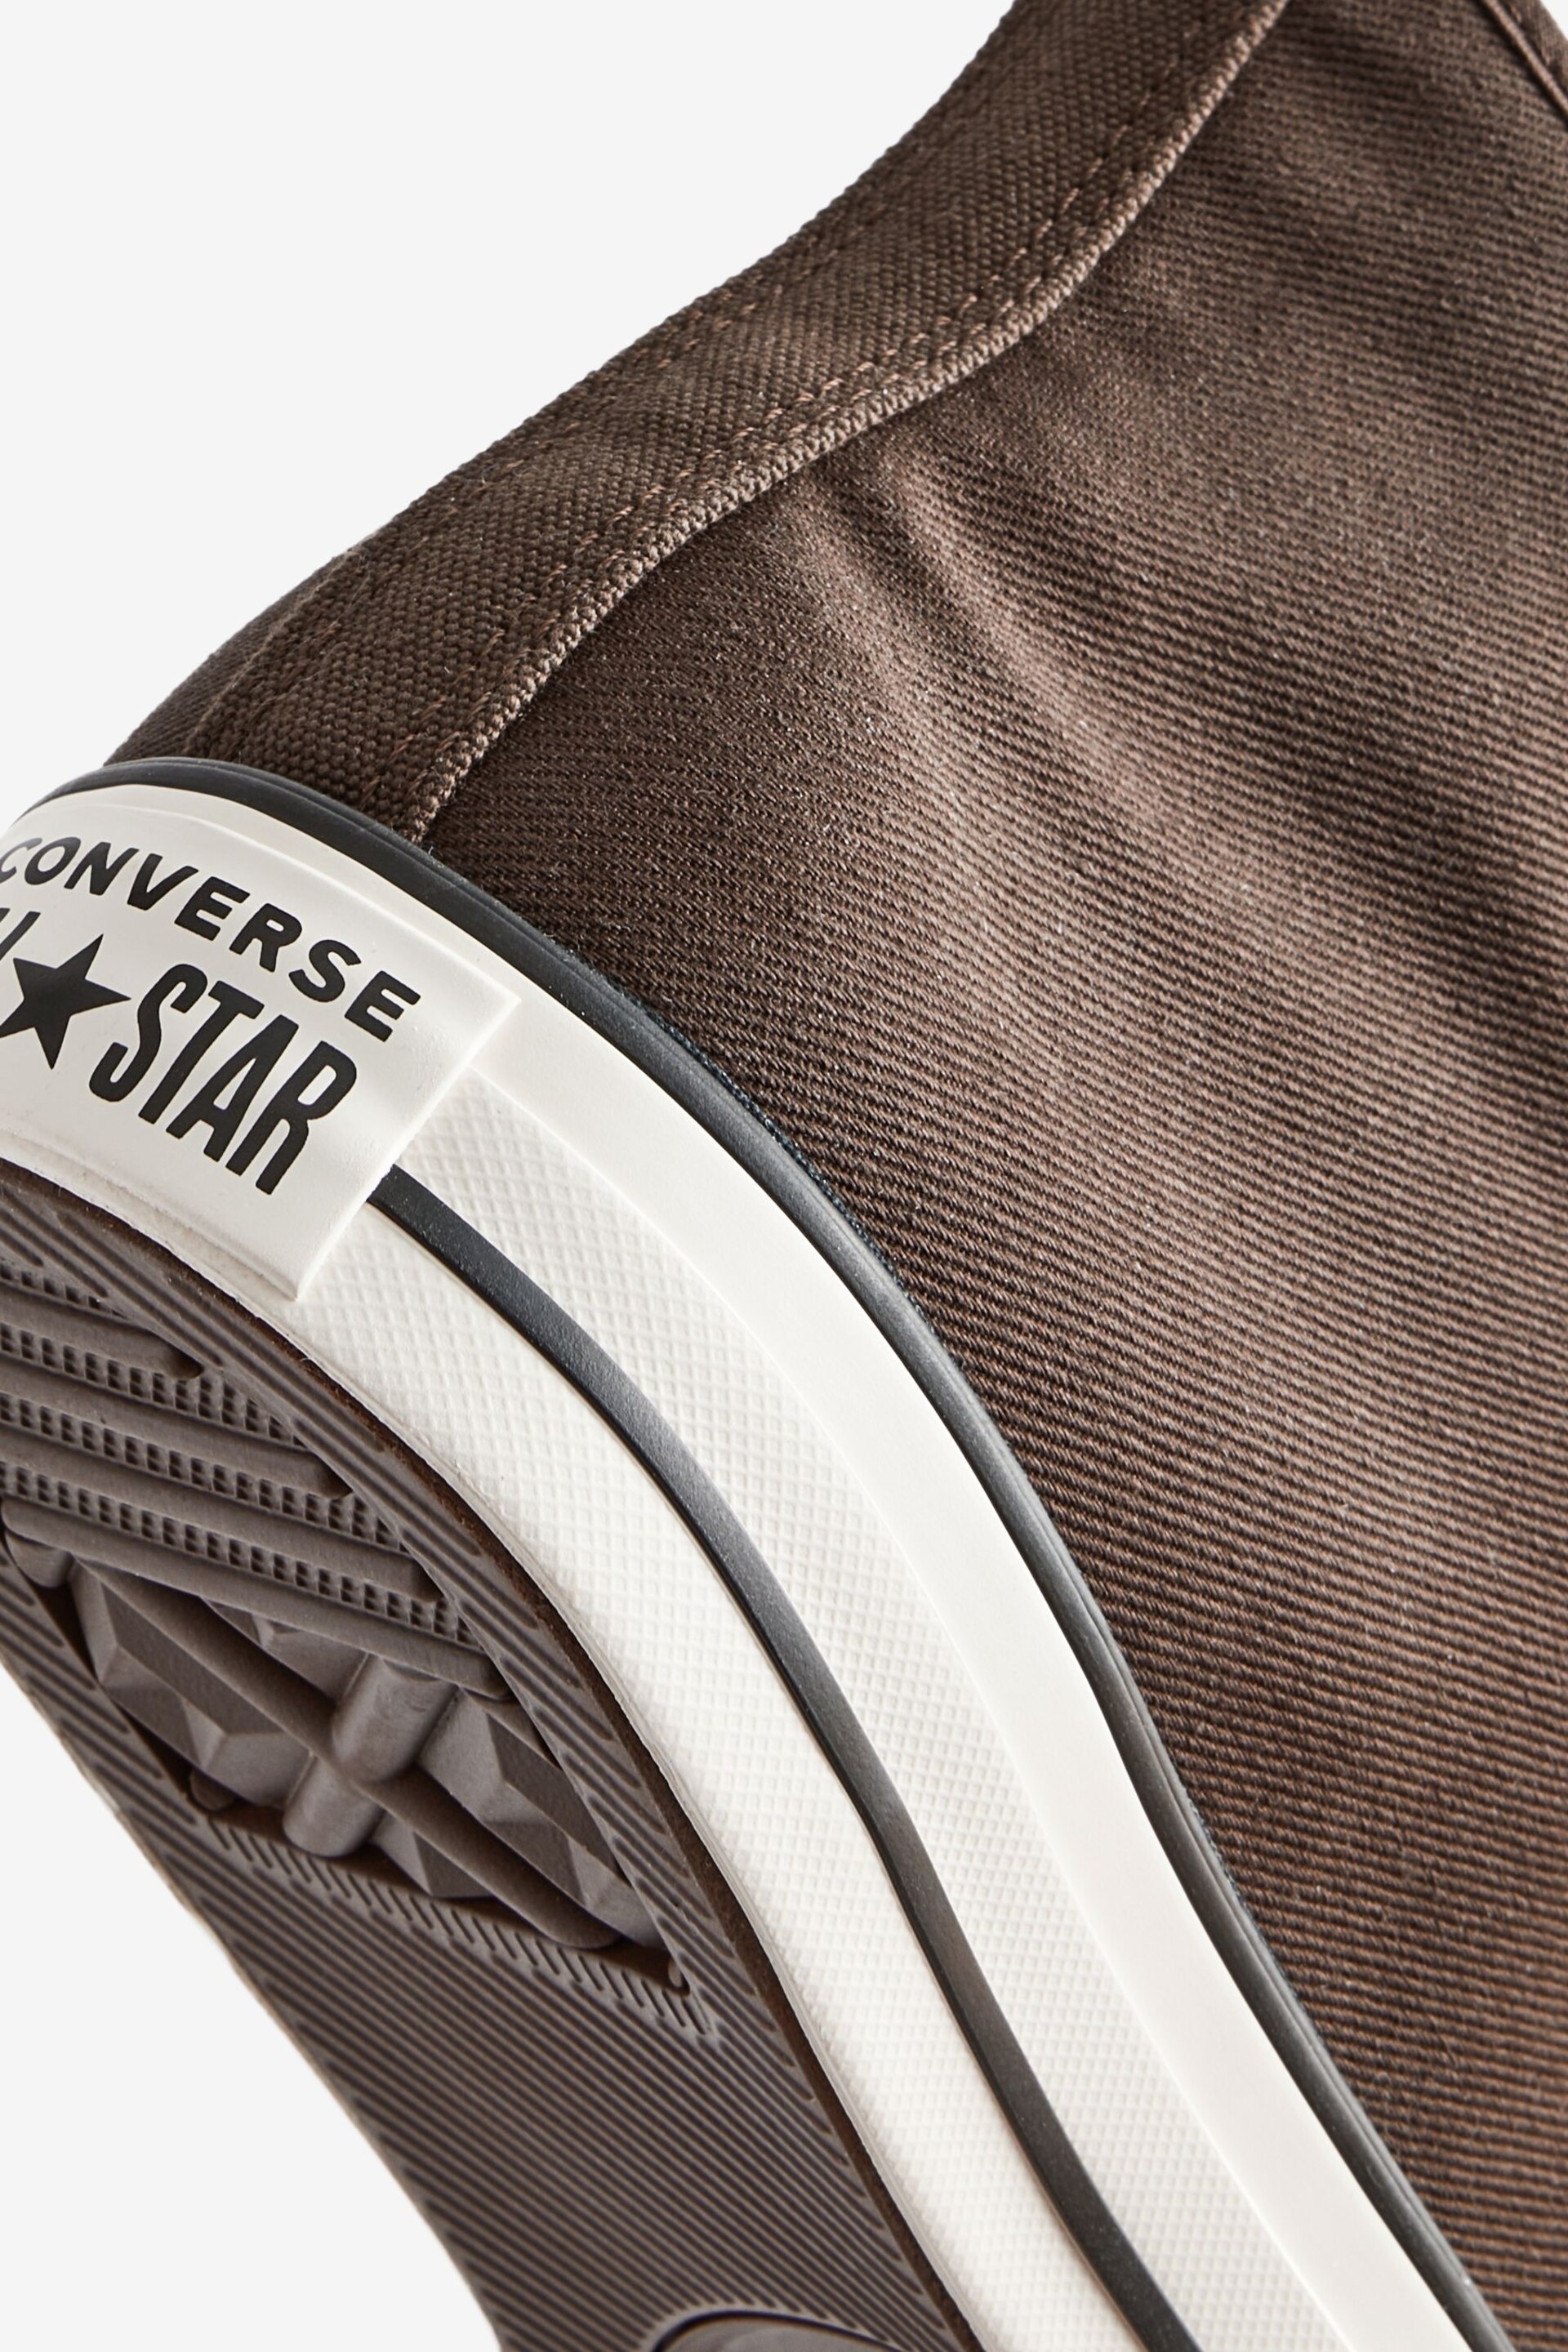 Converse Brown Chuck Taylor All Star High Top Trainers - Image 11 of 12